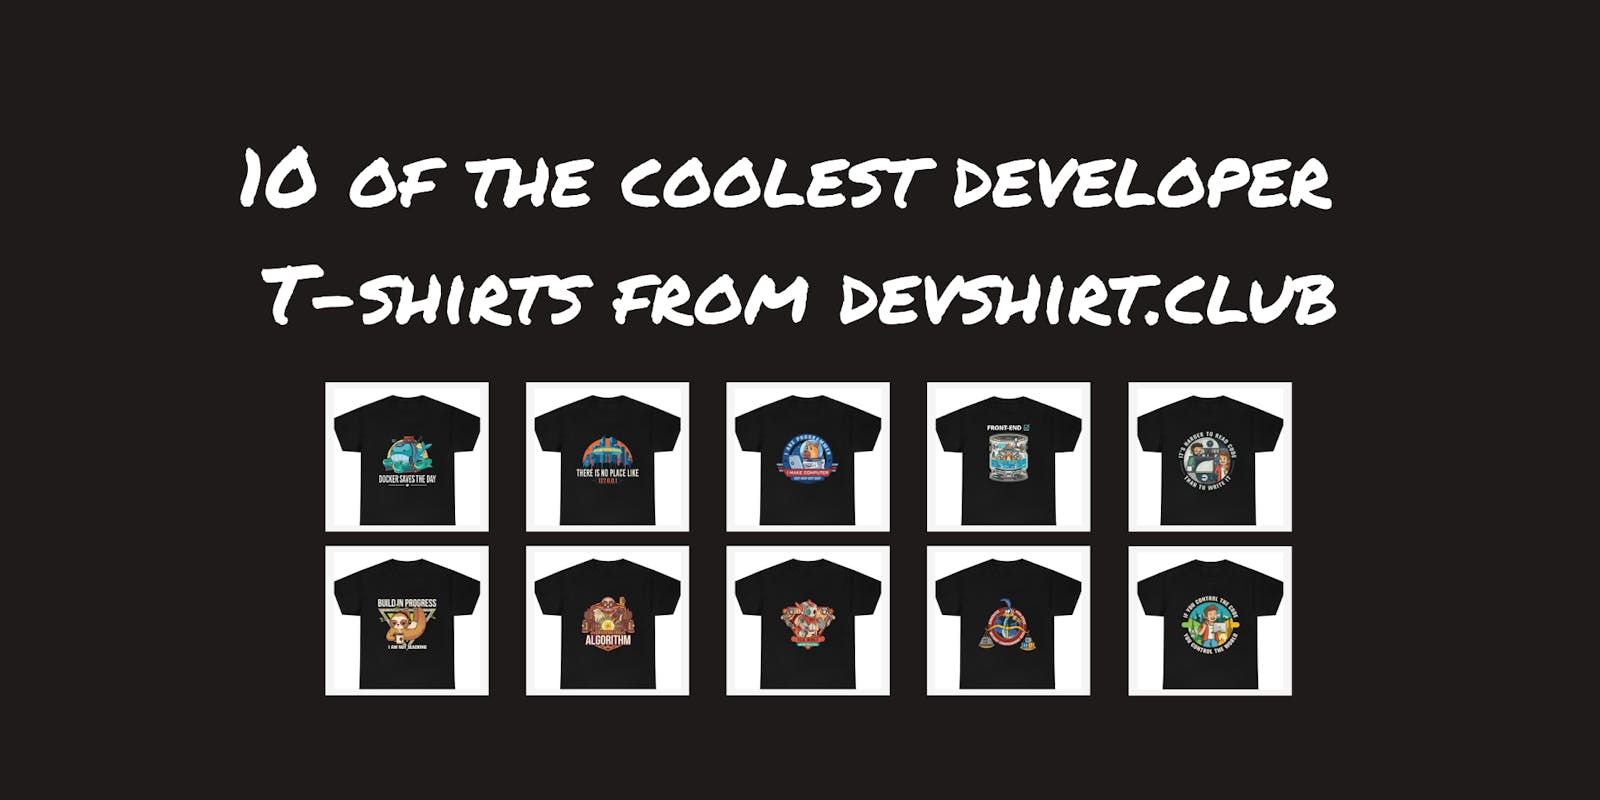 10 of the coolest developer T-shirts from devshirt.club